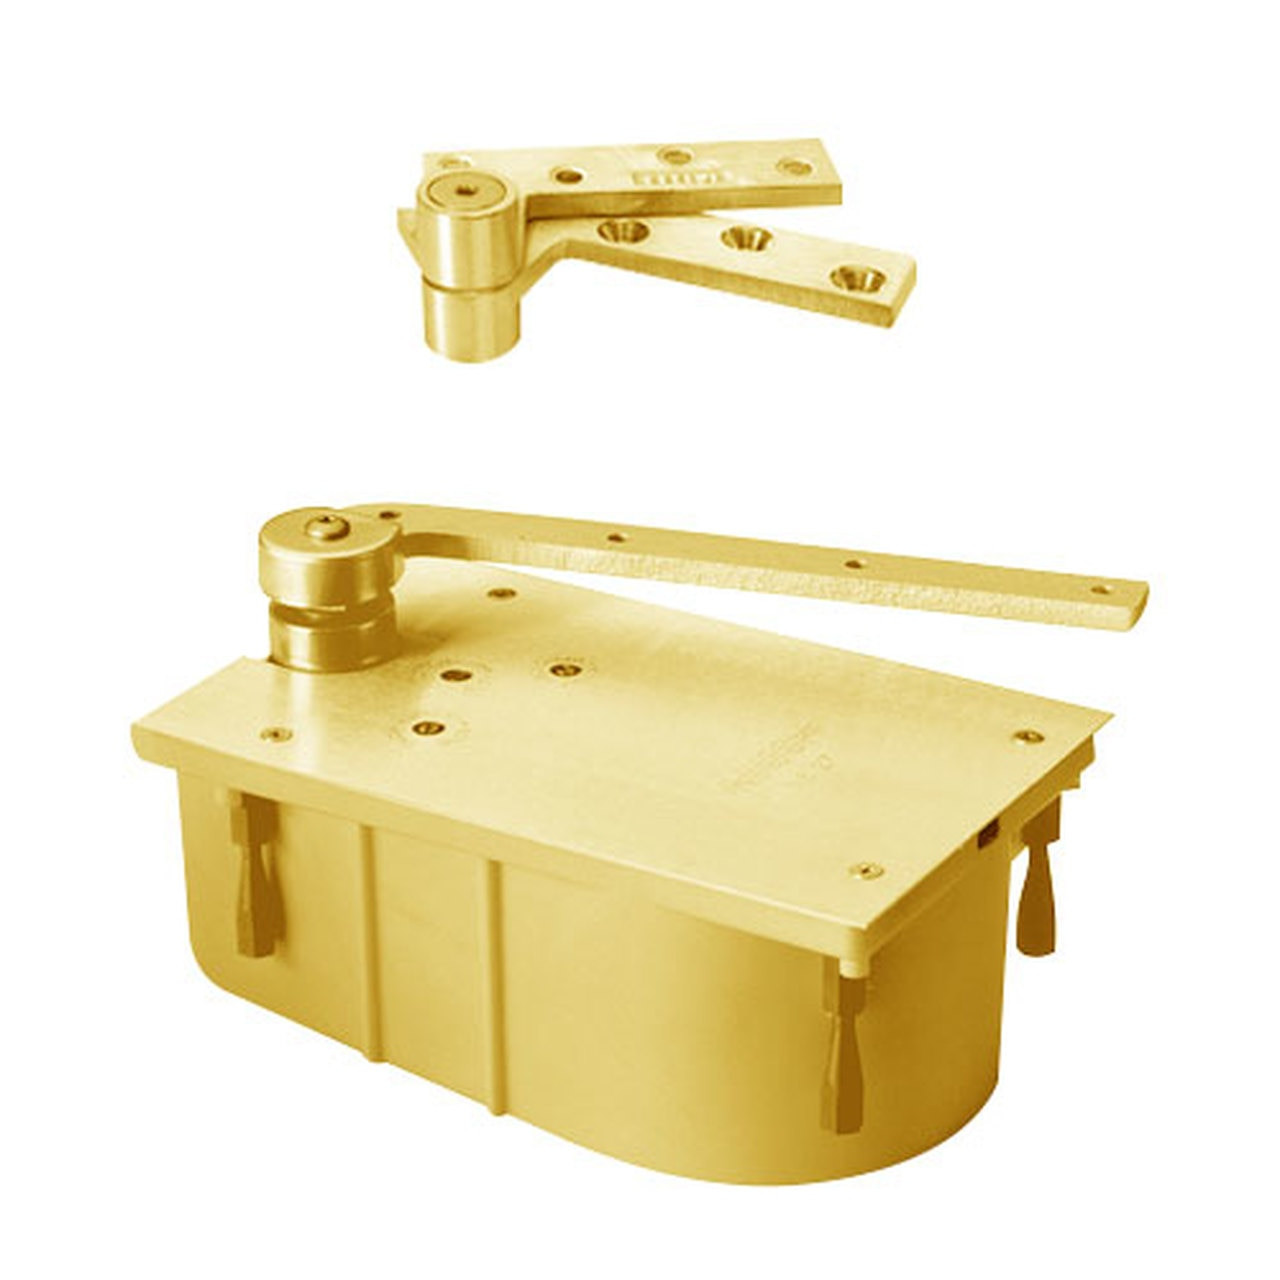 127-105S-LFP-LCC-LH-605 Rixson 27 Series Heavy Duty 3/4" Offset Hung Floor Closer in Bright Brass Finish